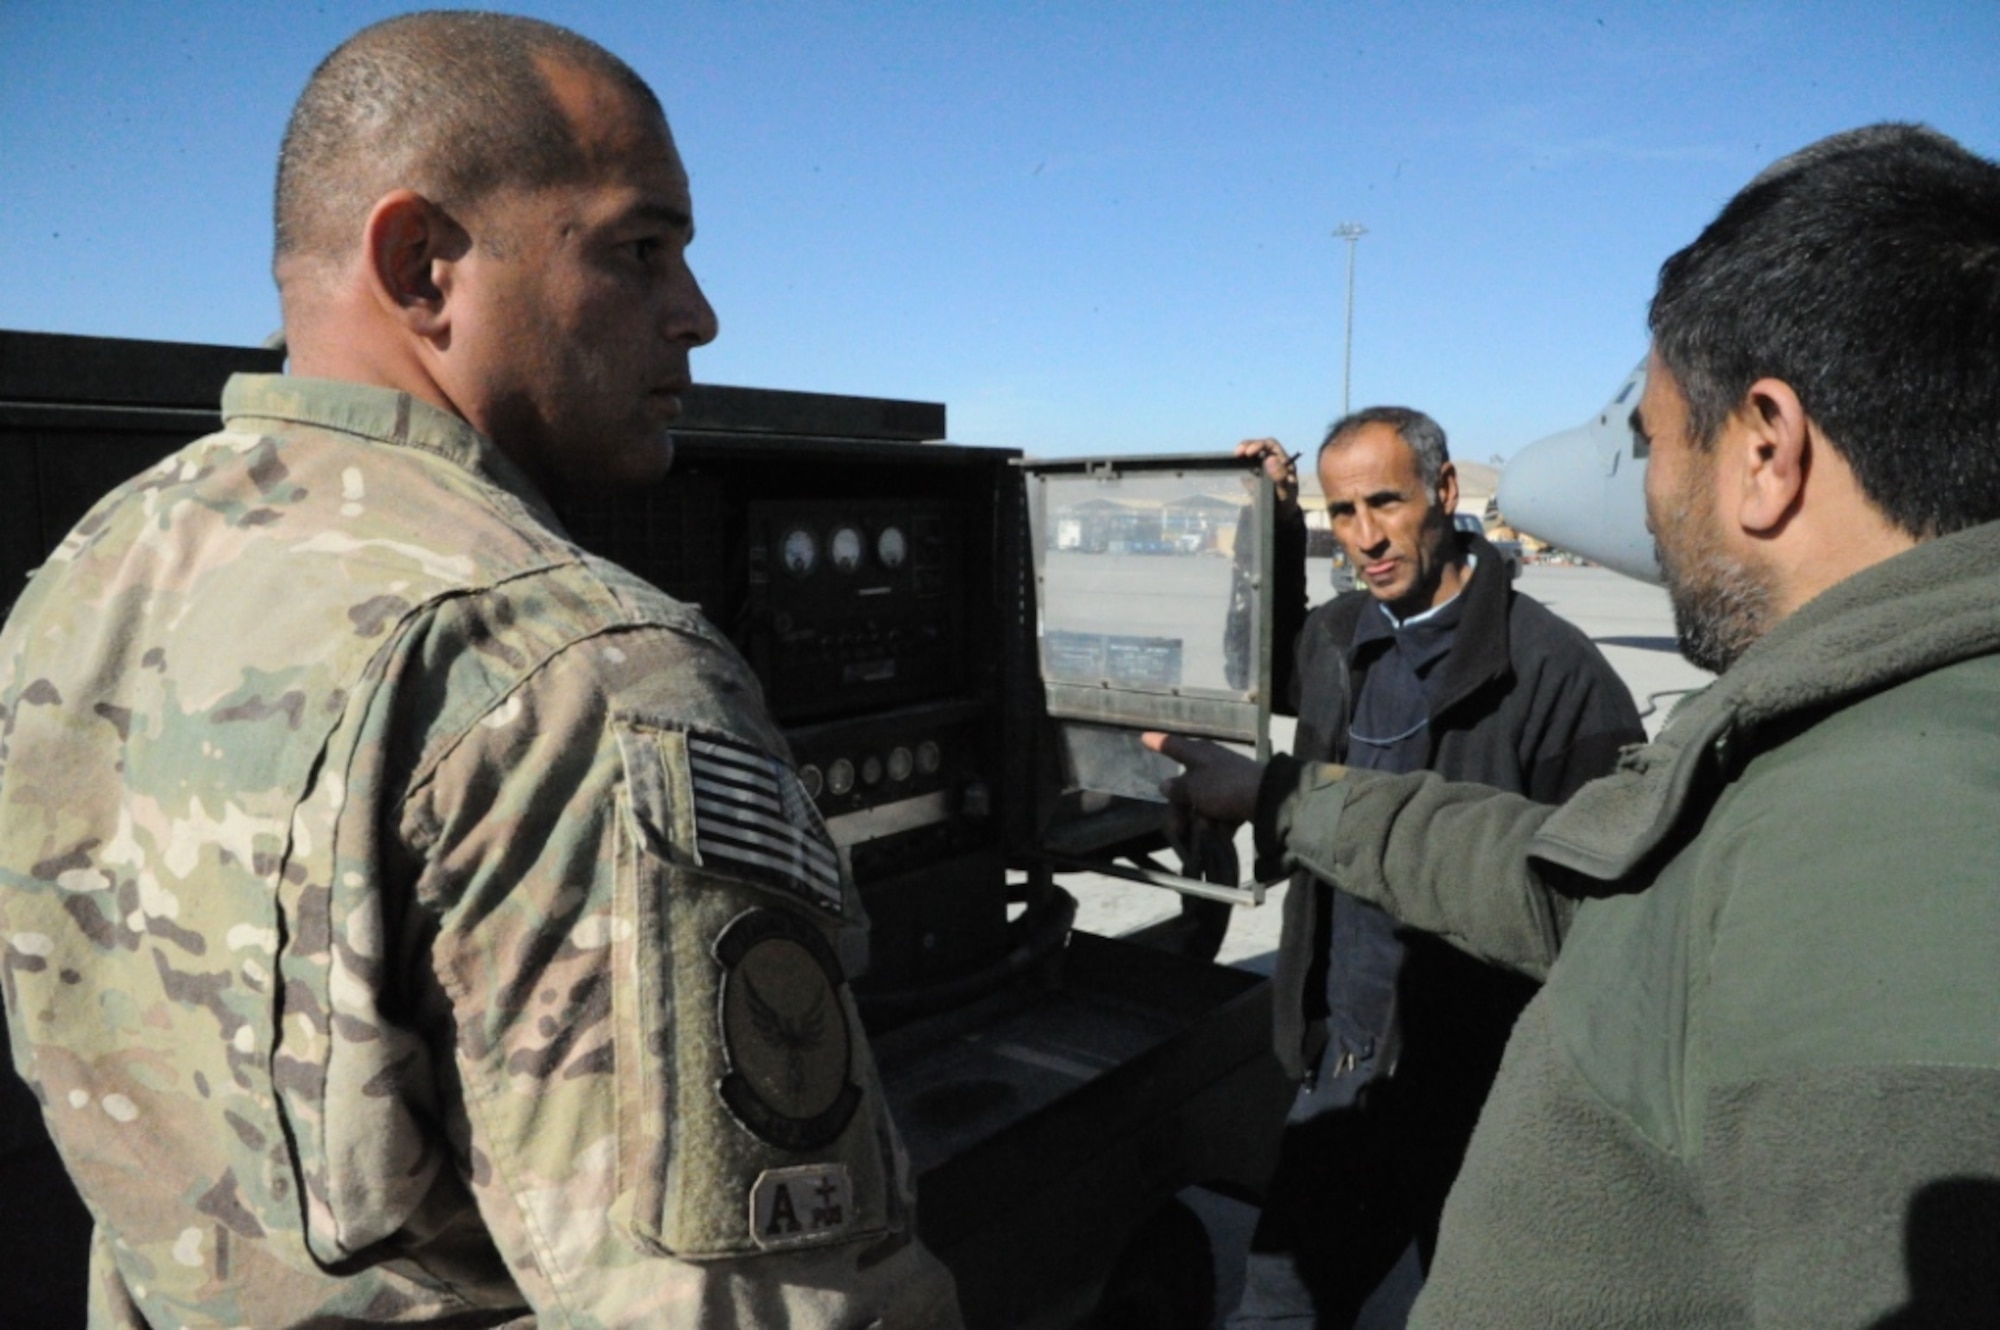 Tech. Sgt. Hector Ayala, Train, Advise, Assist Command-Air fixed wing advisor teaches future Afghan C-130 maintainers how to connect external power to the aircraft with a Dash-86 generator. The training is part of C-130 lead-in training that will better prepare the students for formal training in the United States. The Afghan students study both aircraft familiarization and the English language. (US Air Force photo by Senior Master Sgt. J. LaVoie/Released)